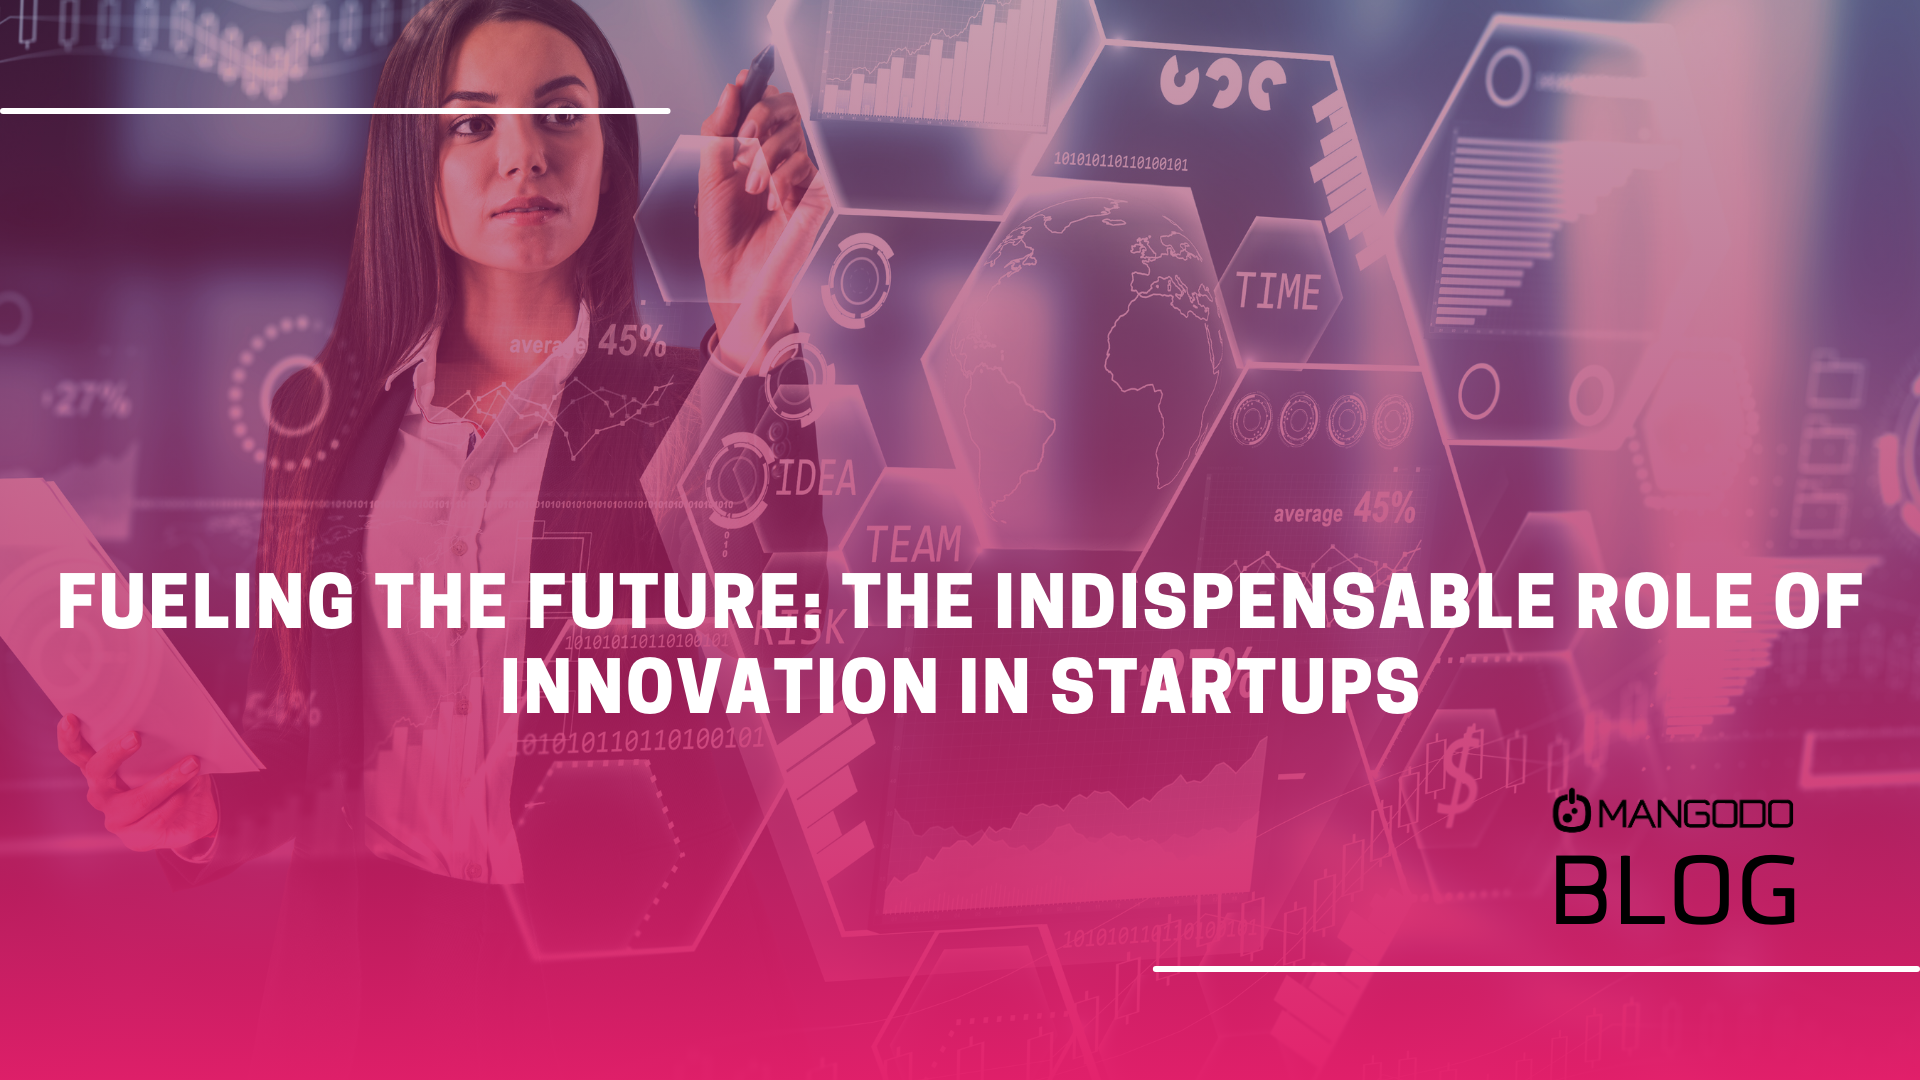 Fueling the Future: The Indispensable Role of Innovation in Startups